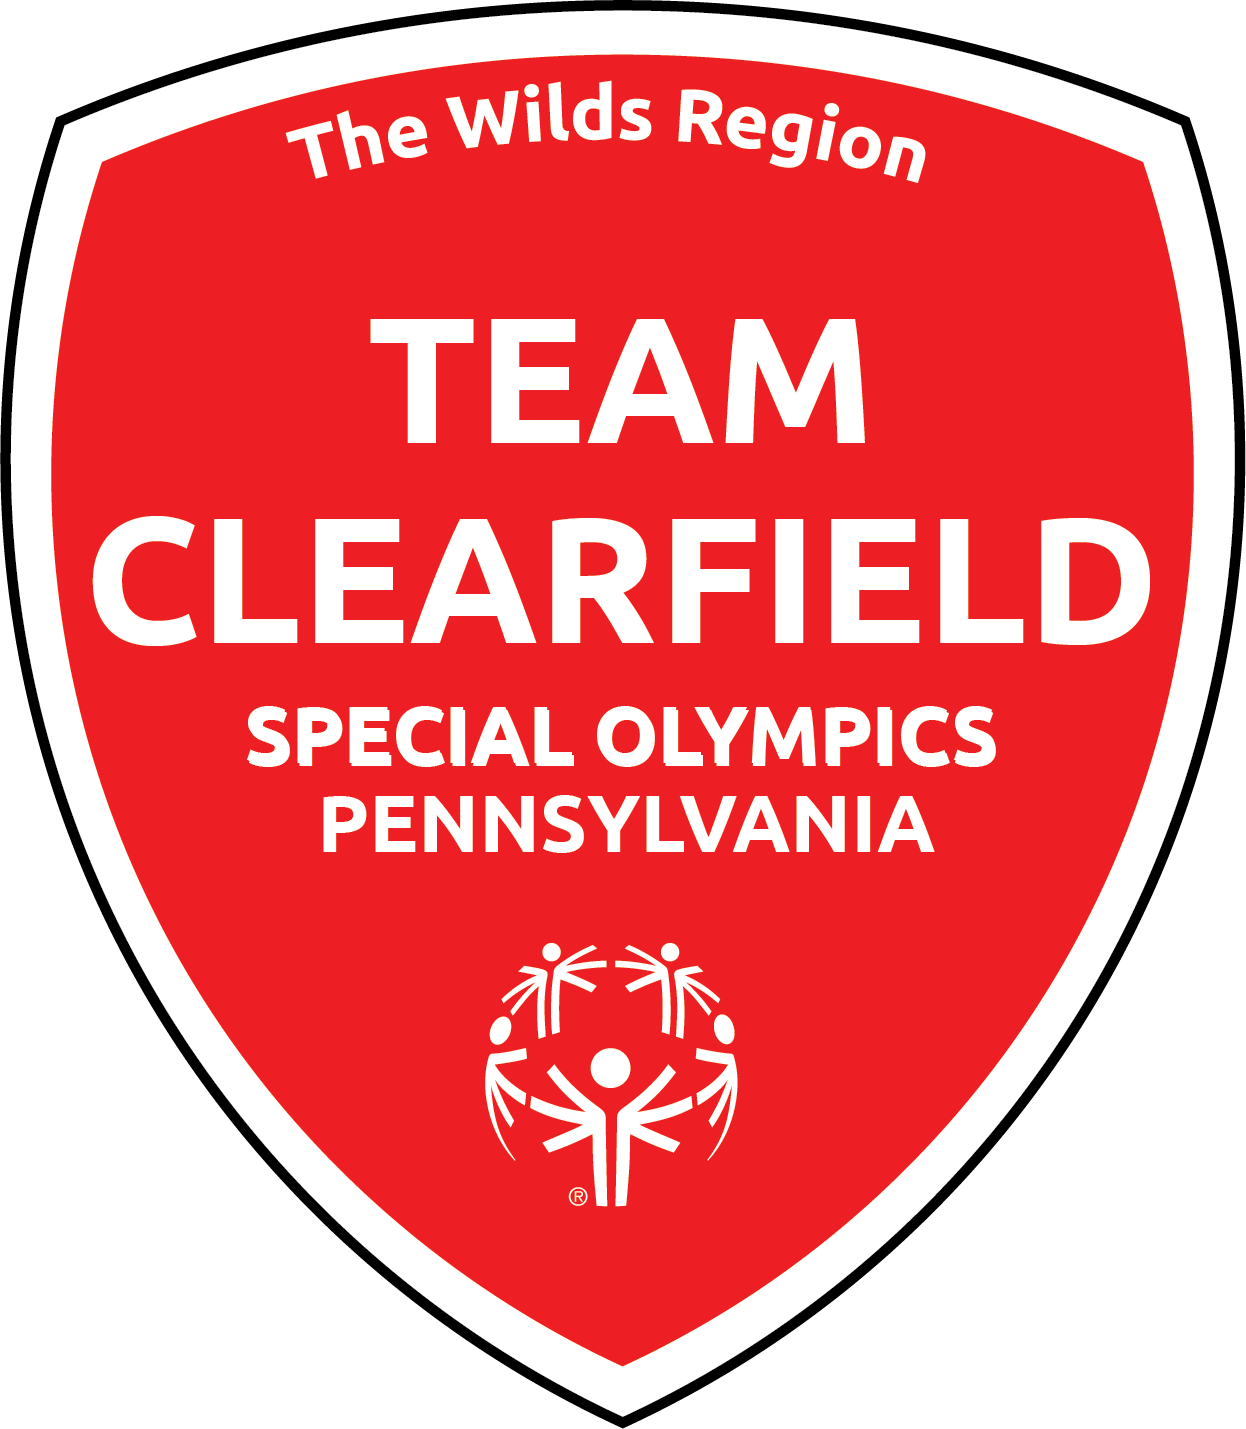 Red Shield Team Clearfield